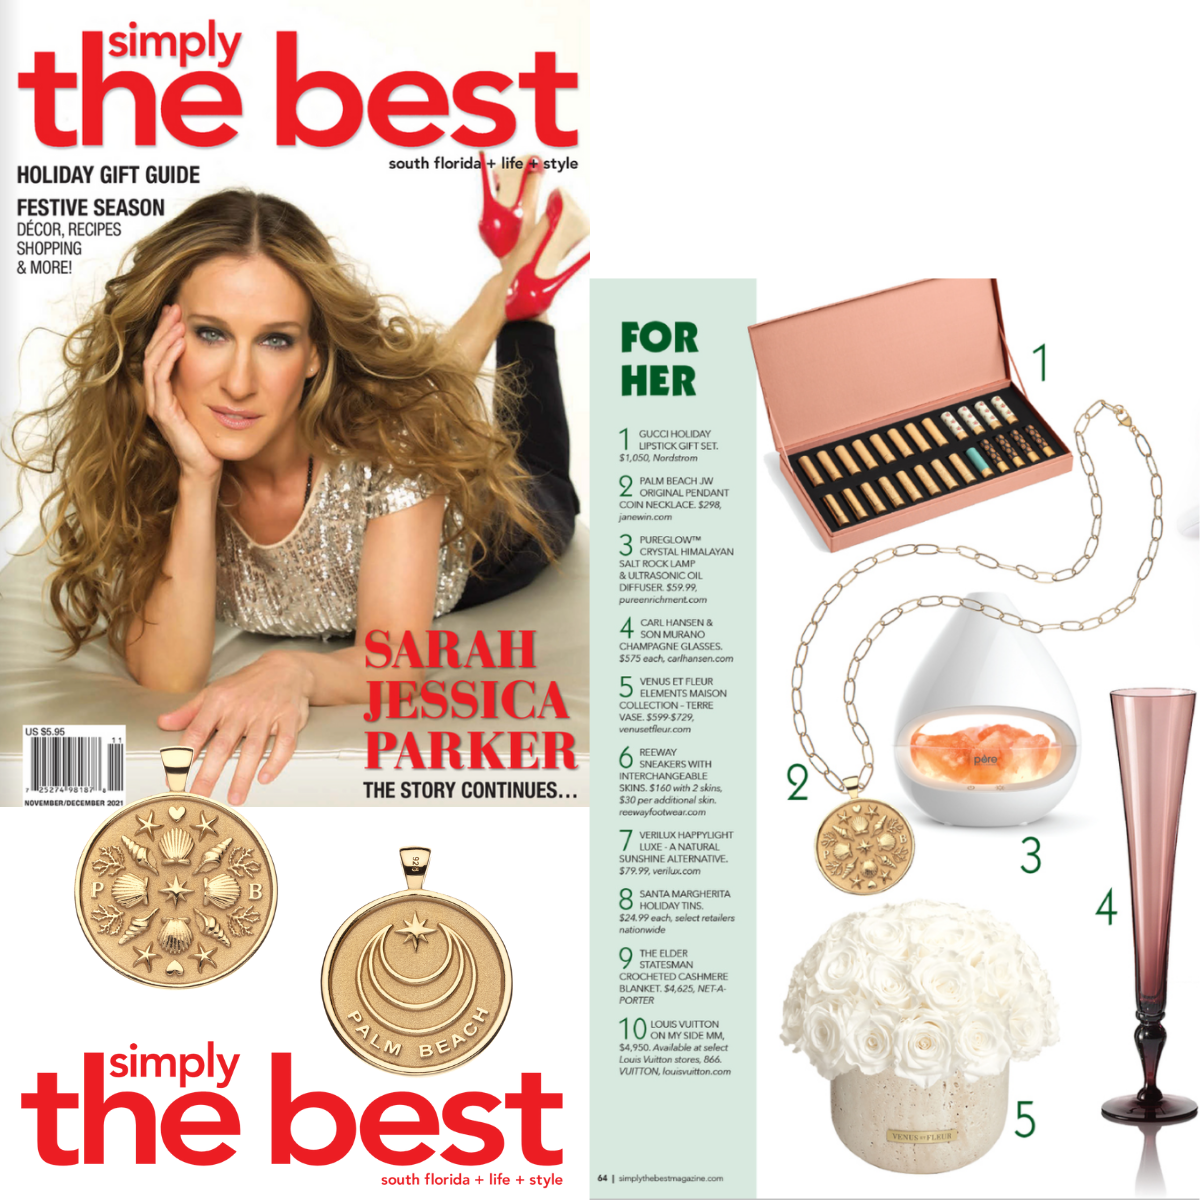 Press Highlight: Simply the Best Holiday Gift Guide